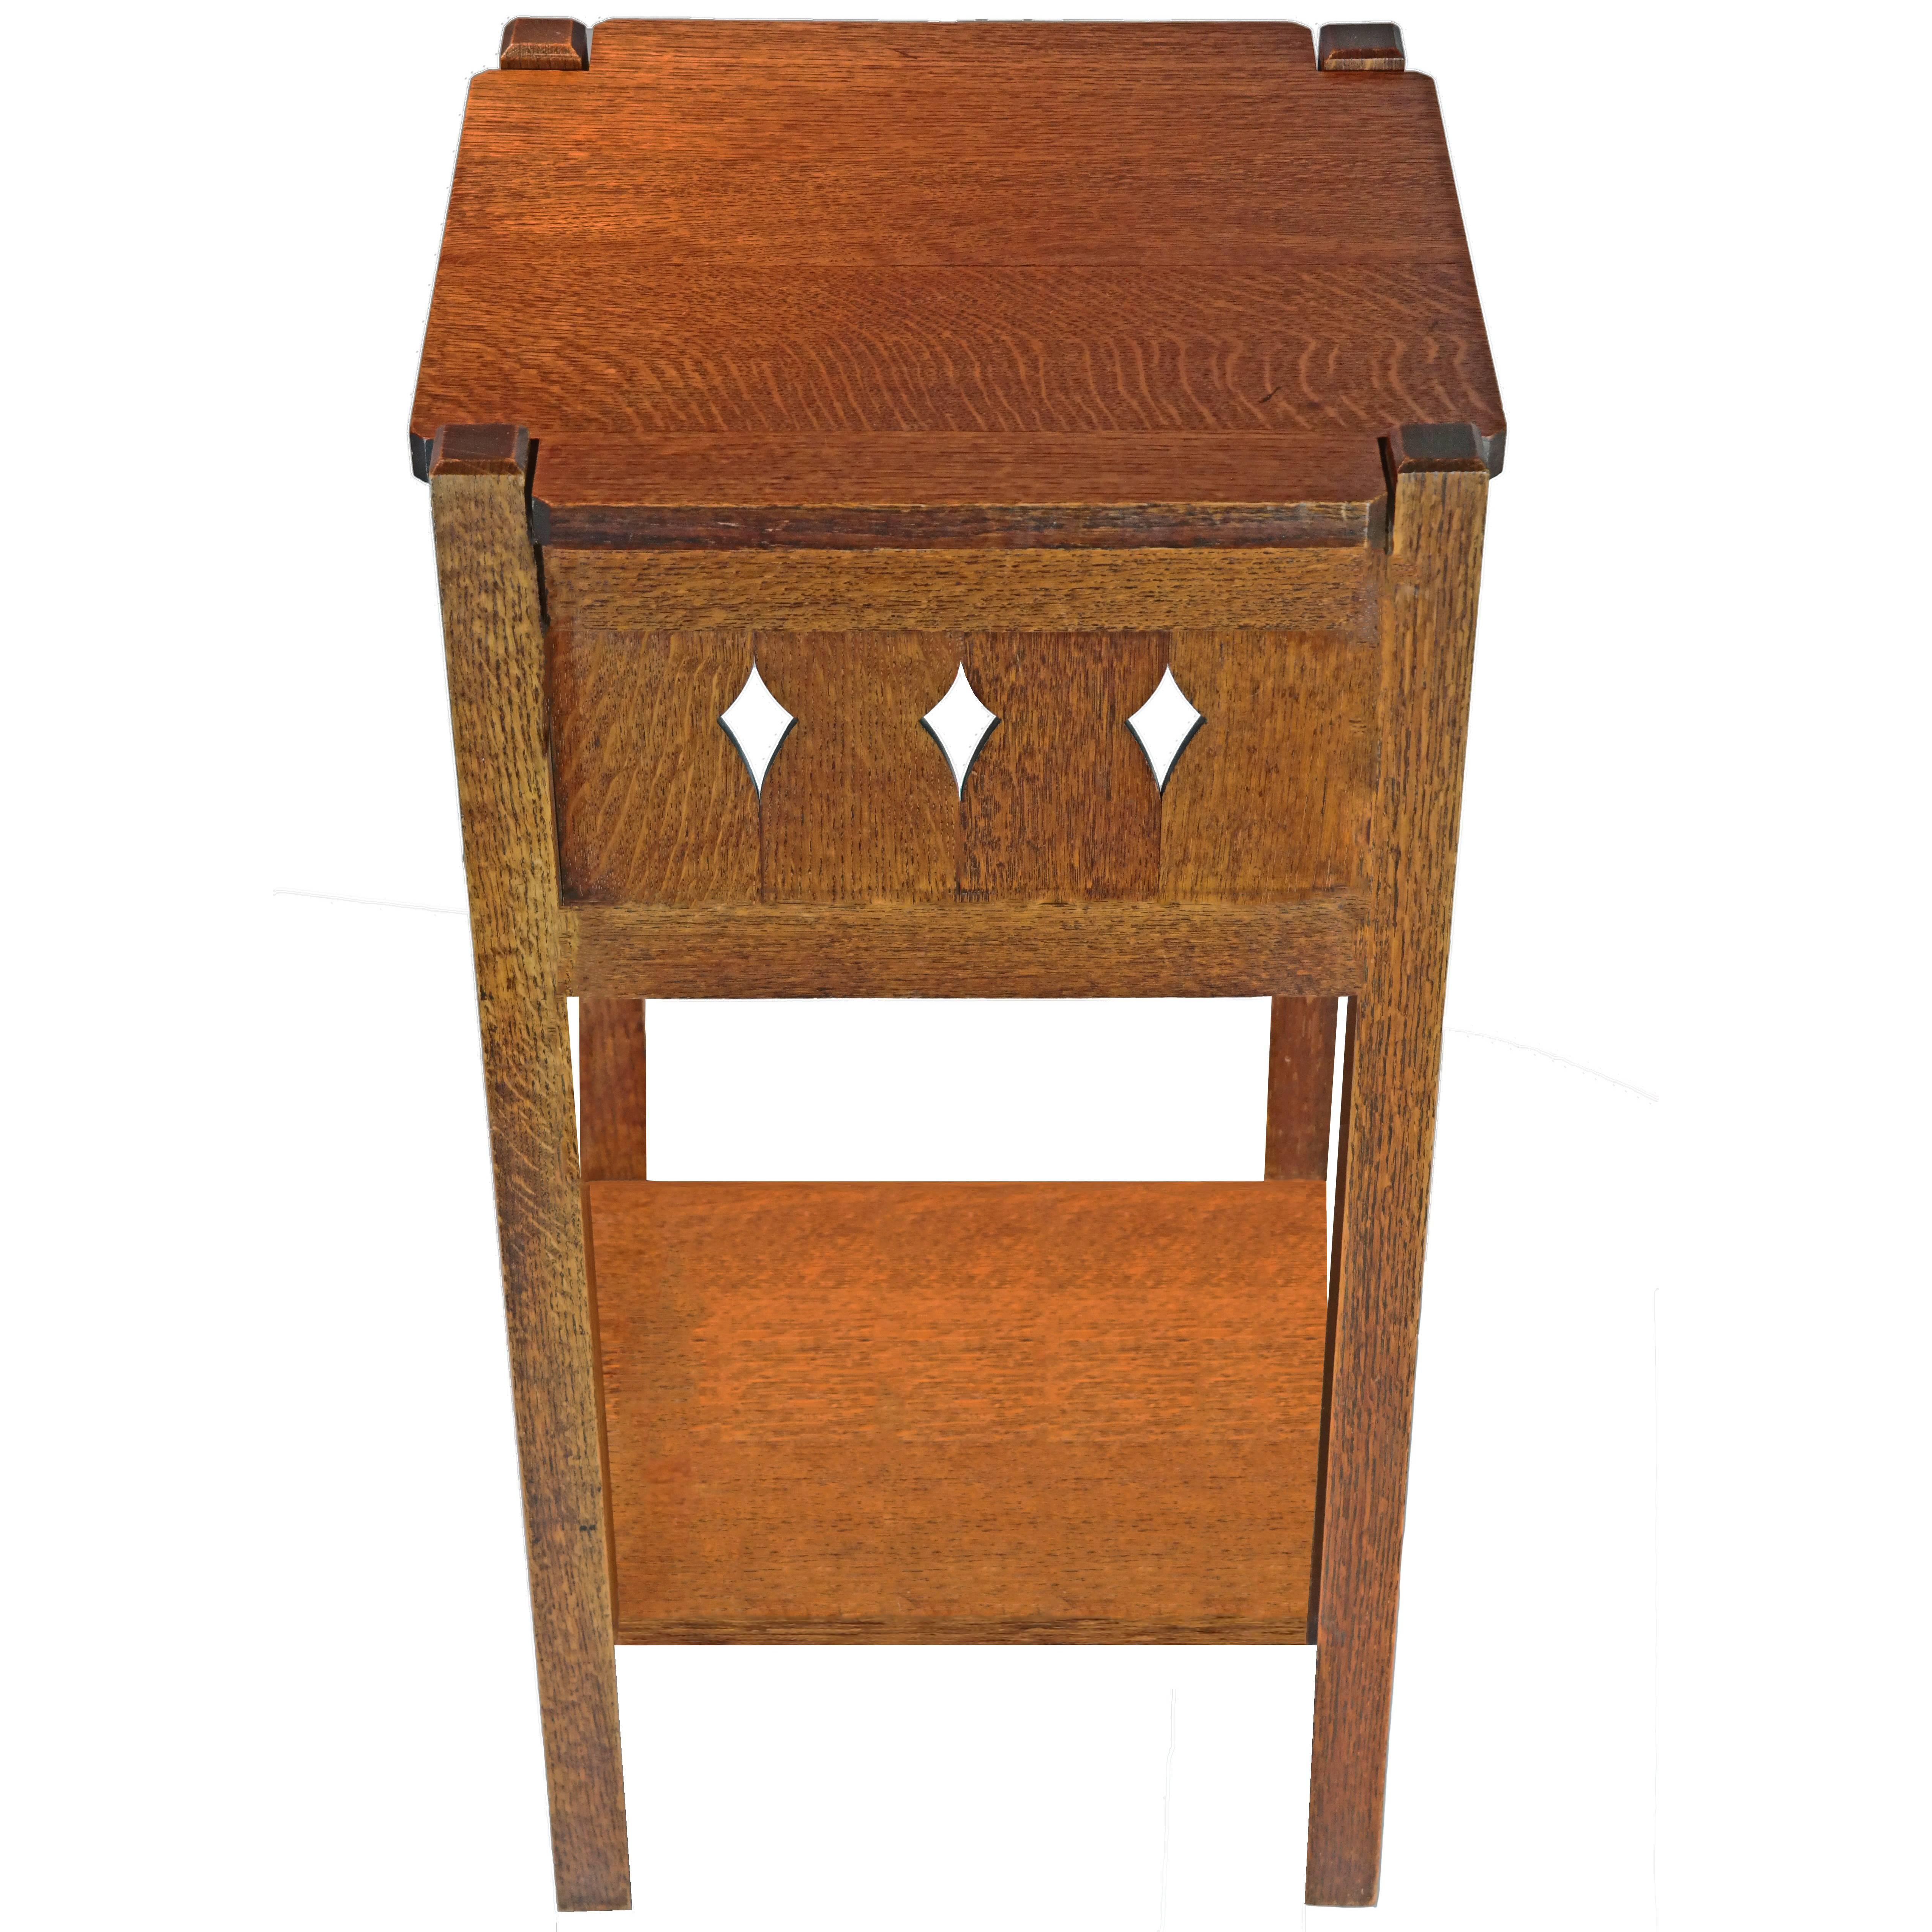 Scottish Arts and Crafts Mission-Style Oak Side Table